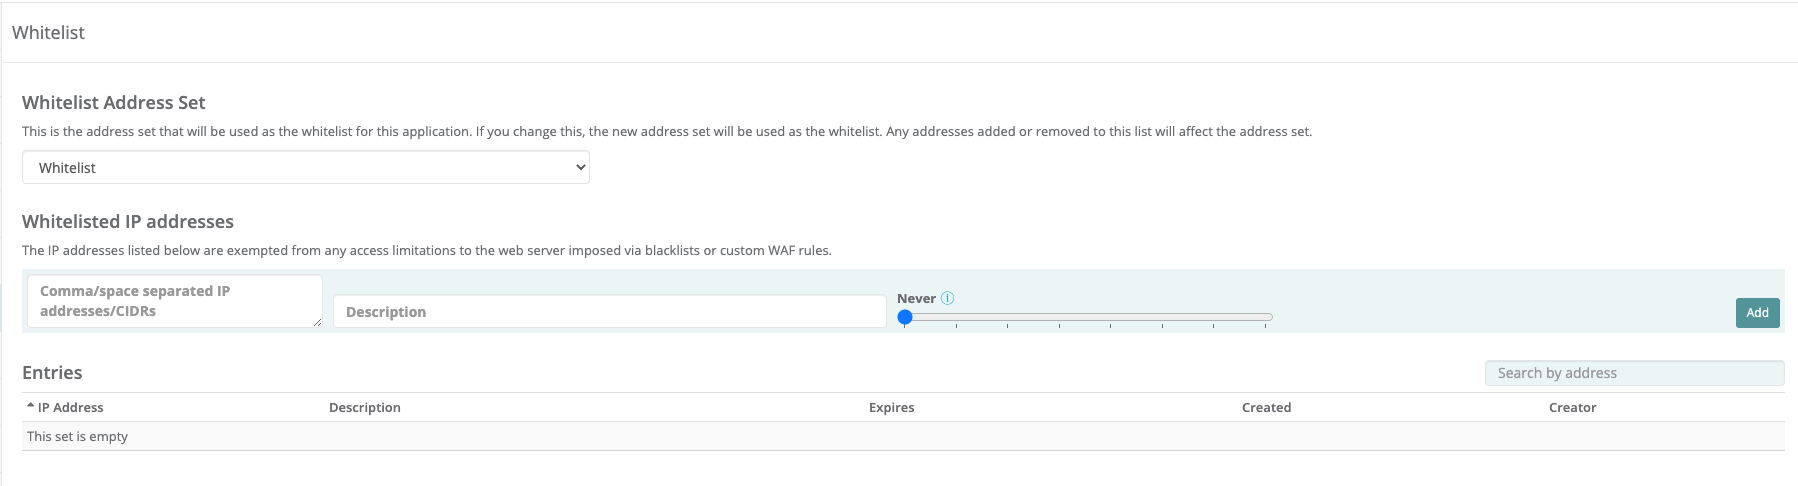 Webscale whitelist page in the control panel